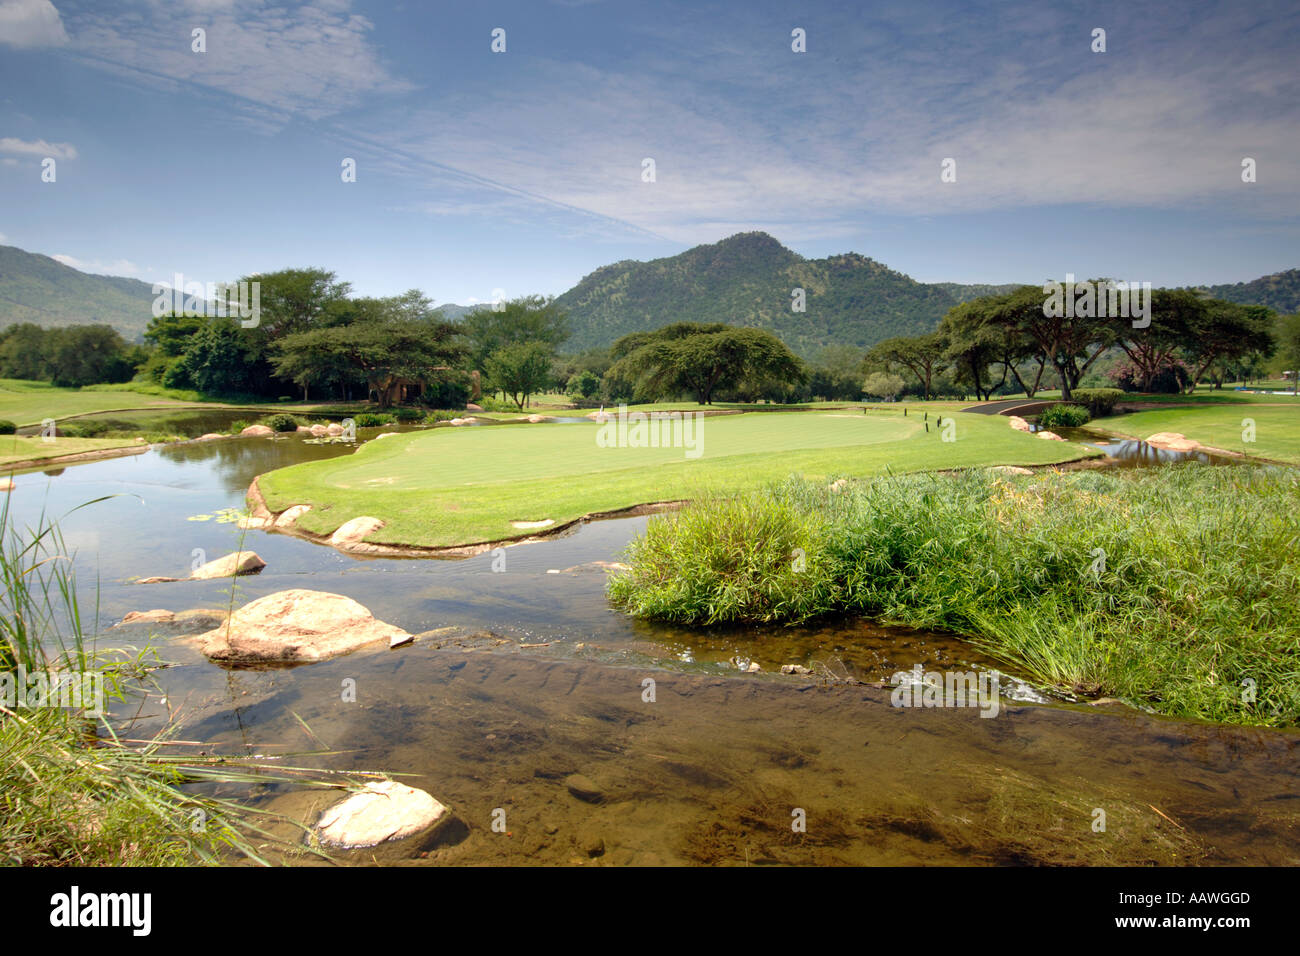 The ninth hole of the Gary Player golf course at the Sun City resort in South Africa. Stock Photo